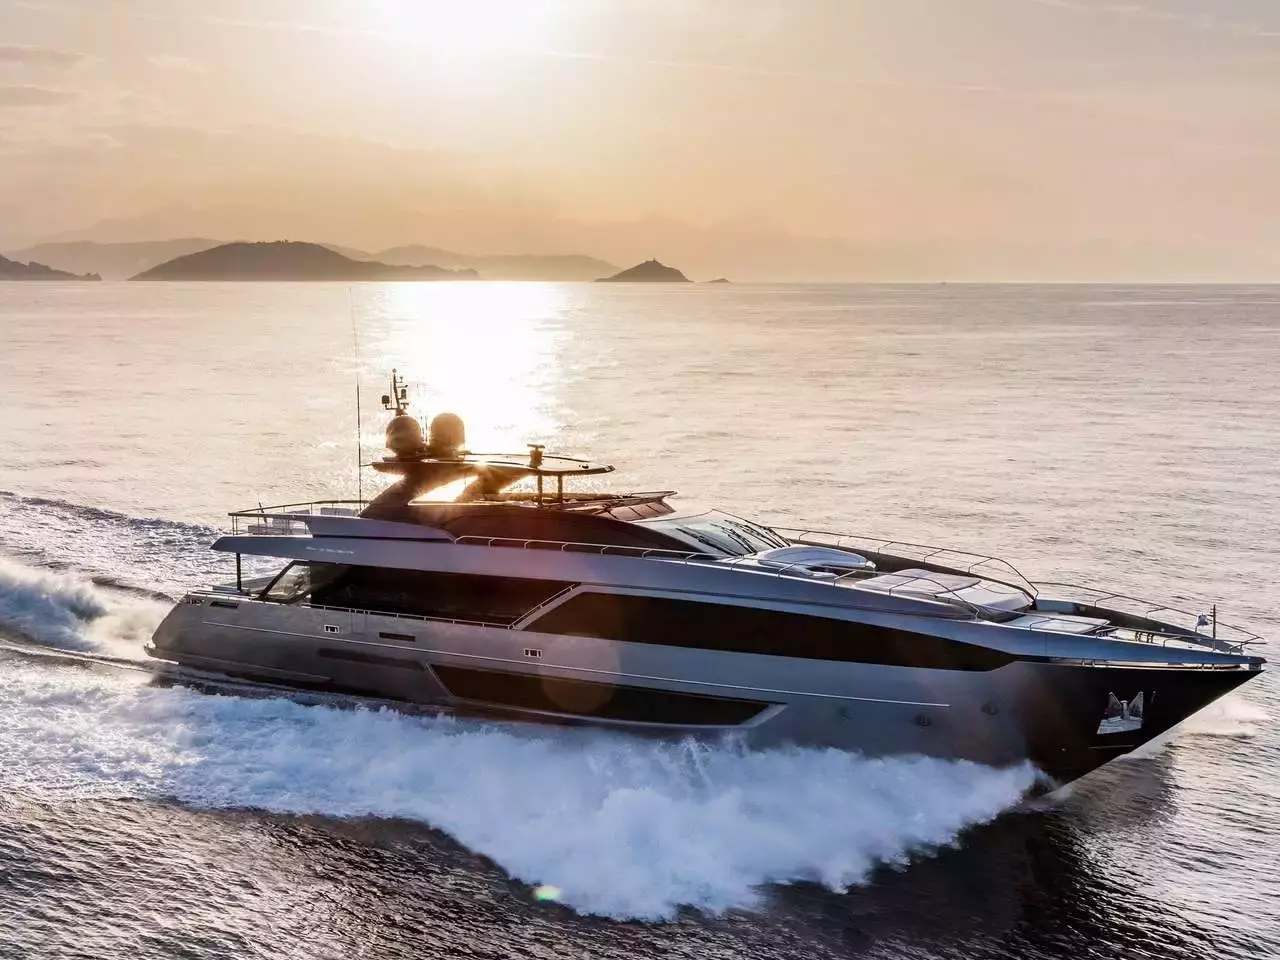 Elysium I by Riva - Top rates for a Rental of a private Superyacht in Italy